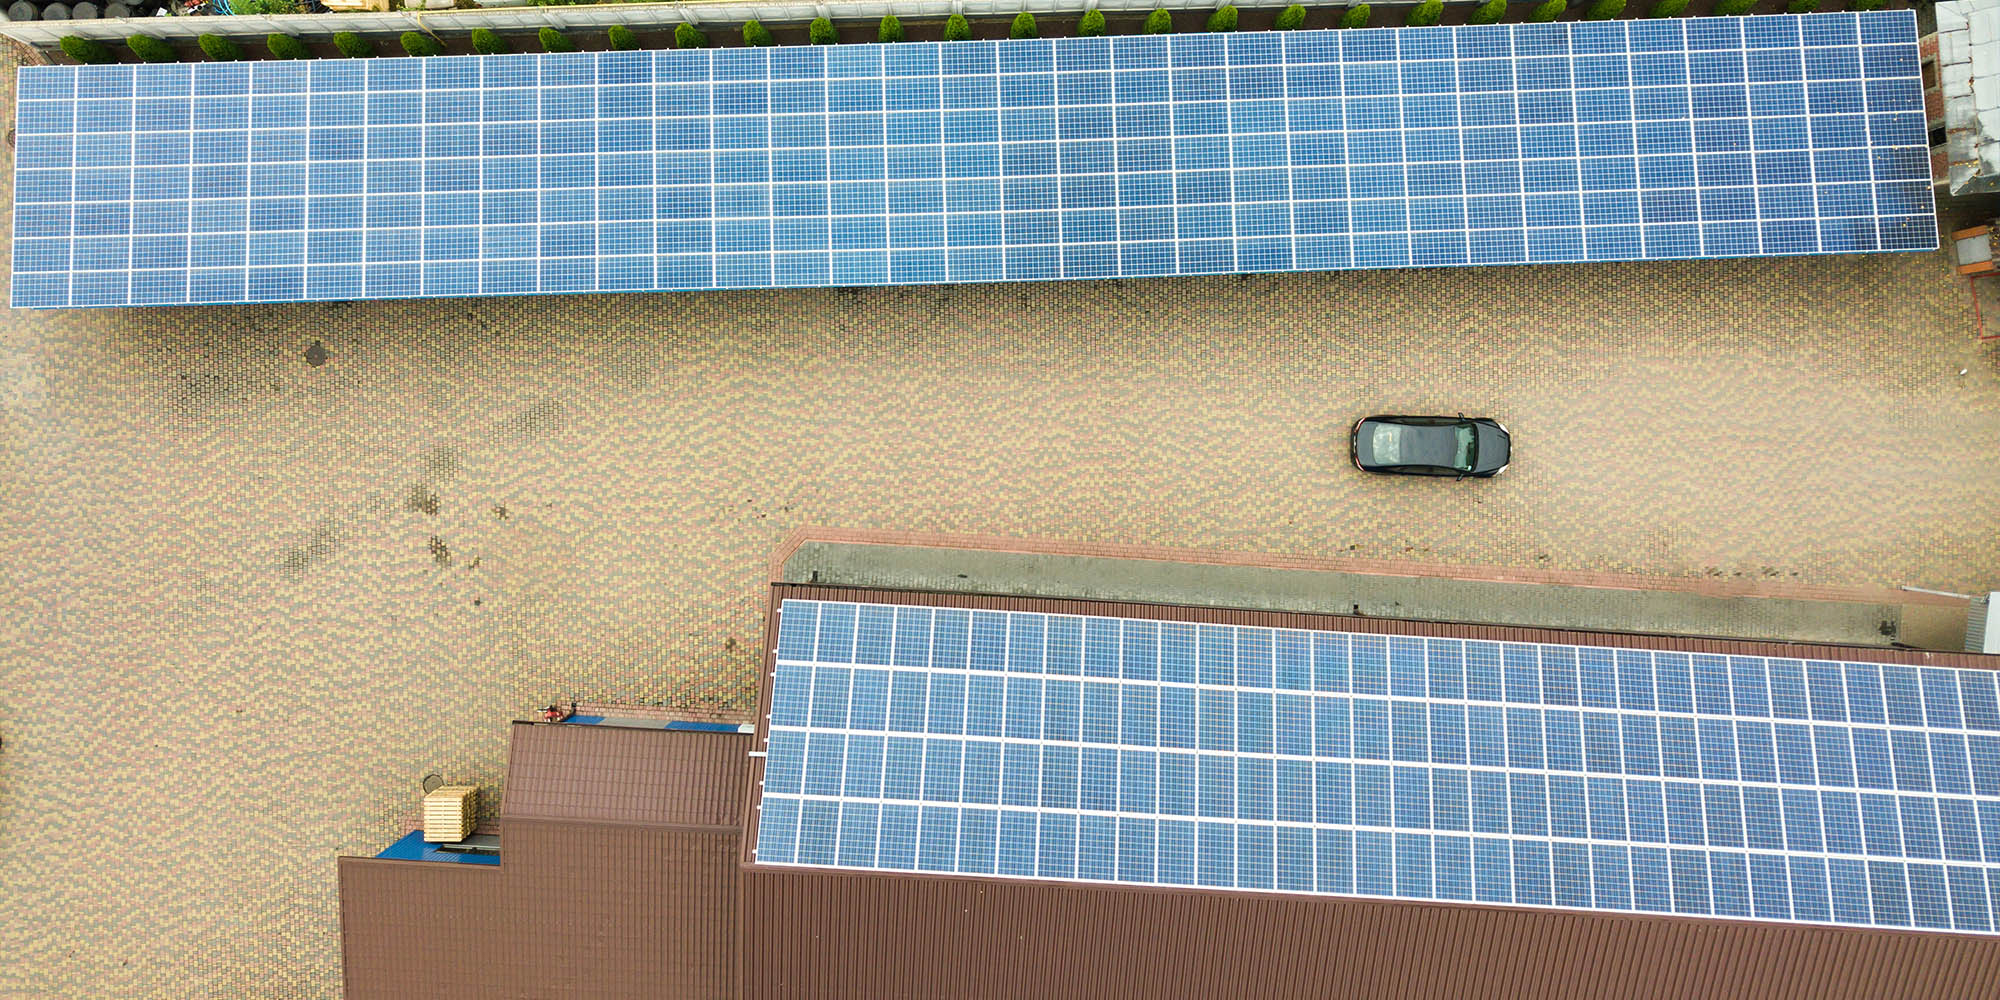 Row of house with solar panels on roof  on blue sky background. 3d illustration